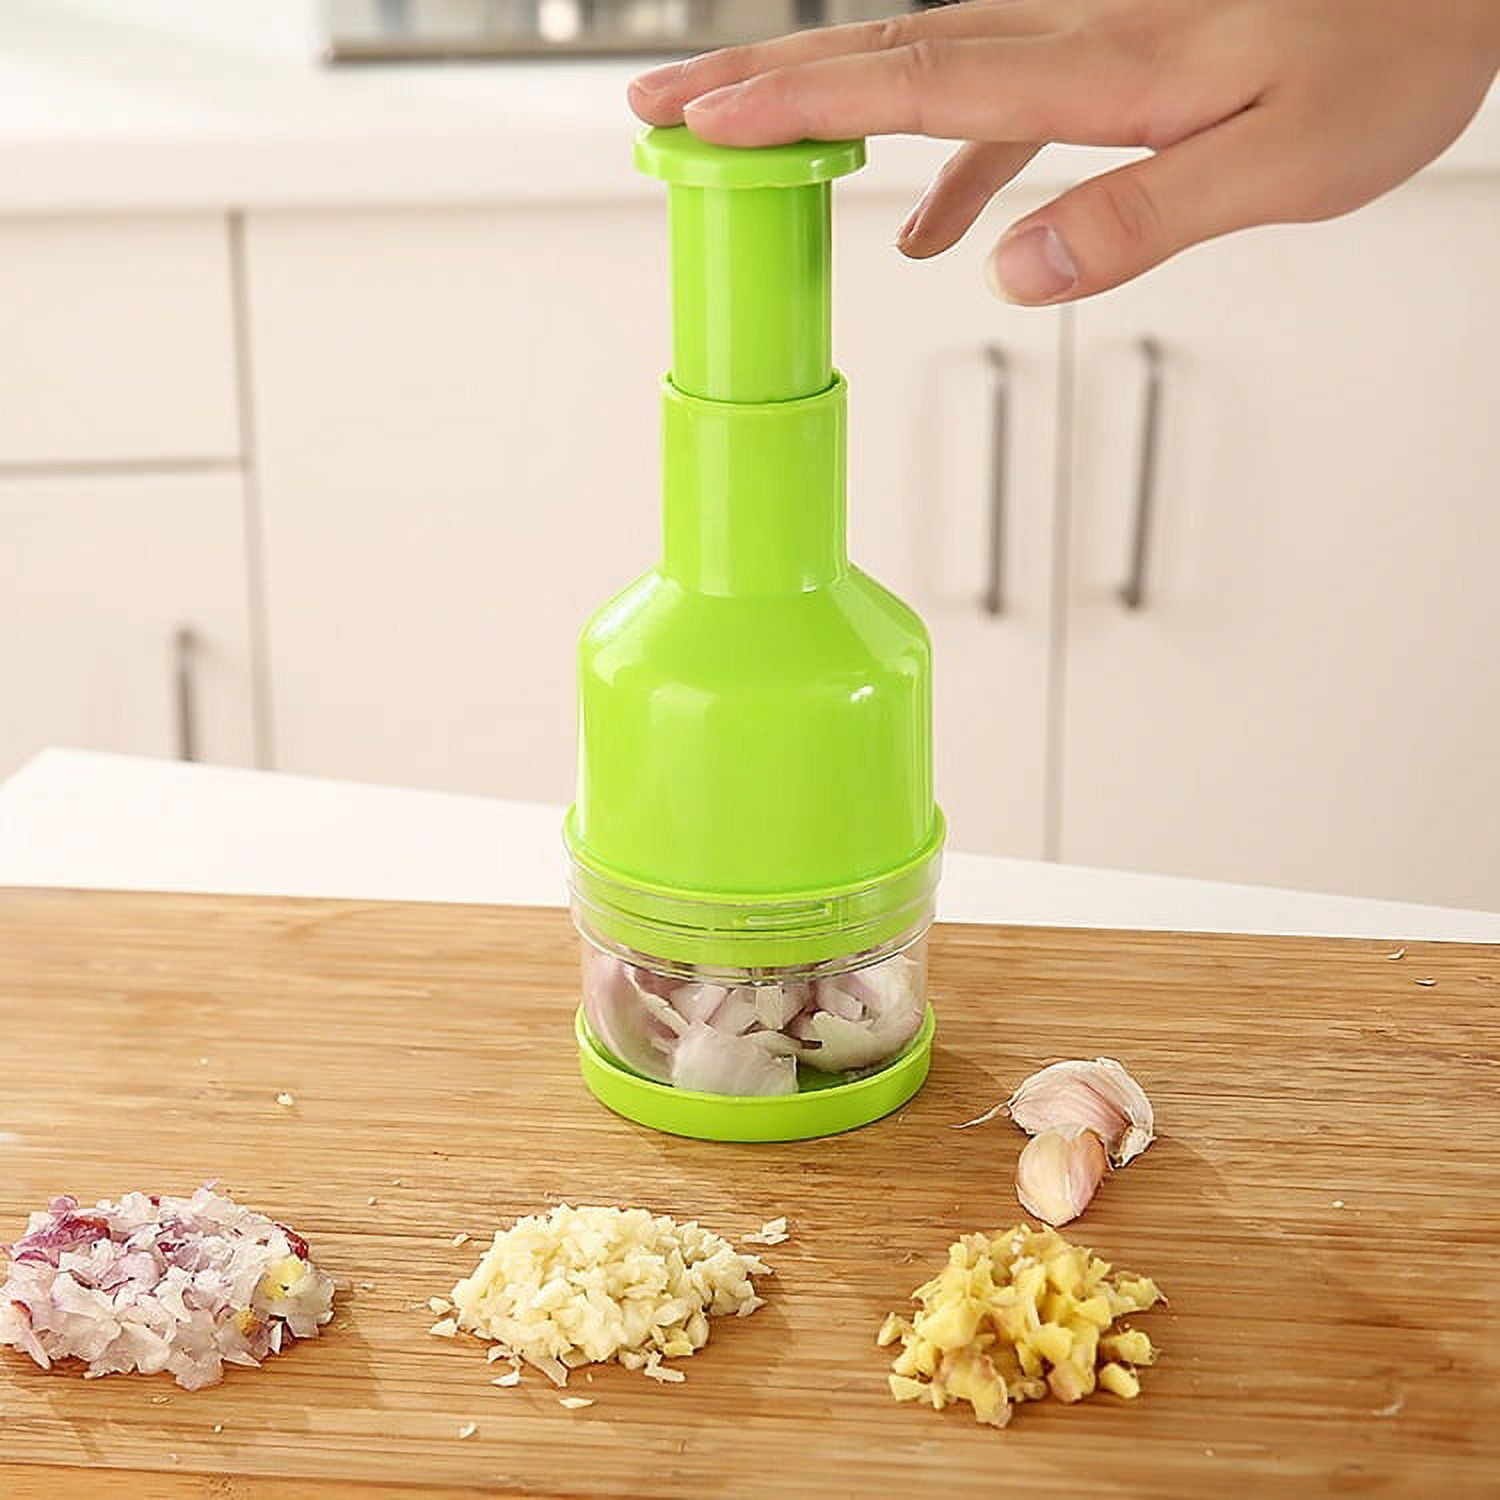 Fast and Easy Garlic Chopper – Cookie Kats